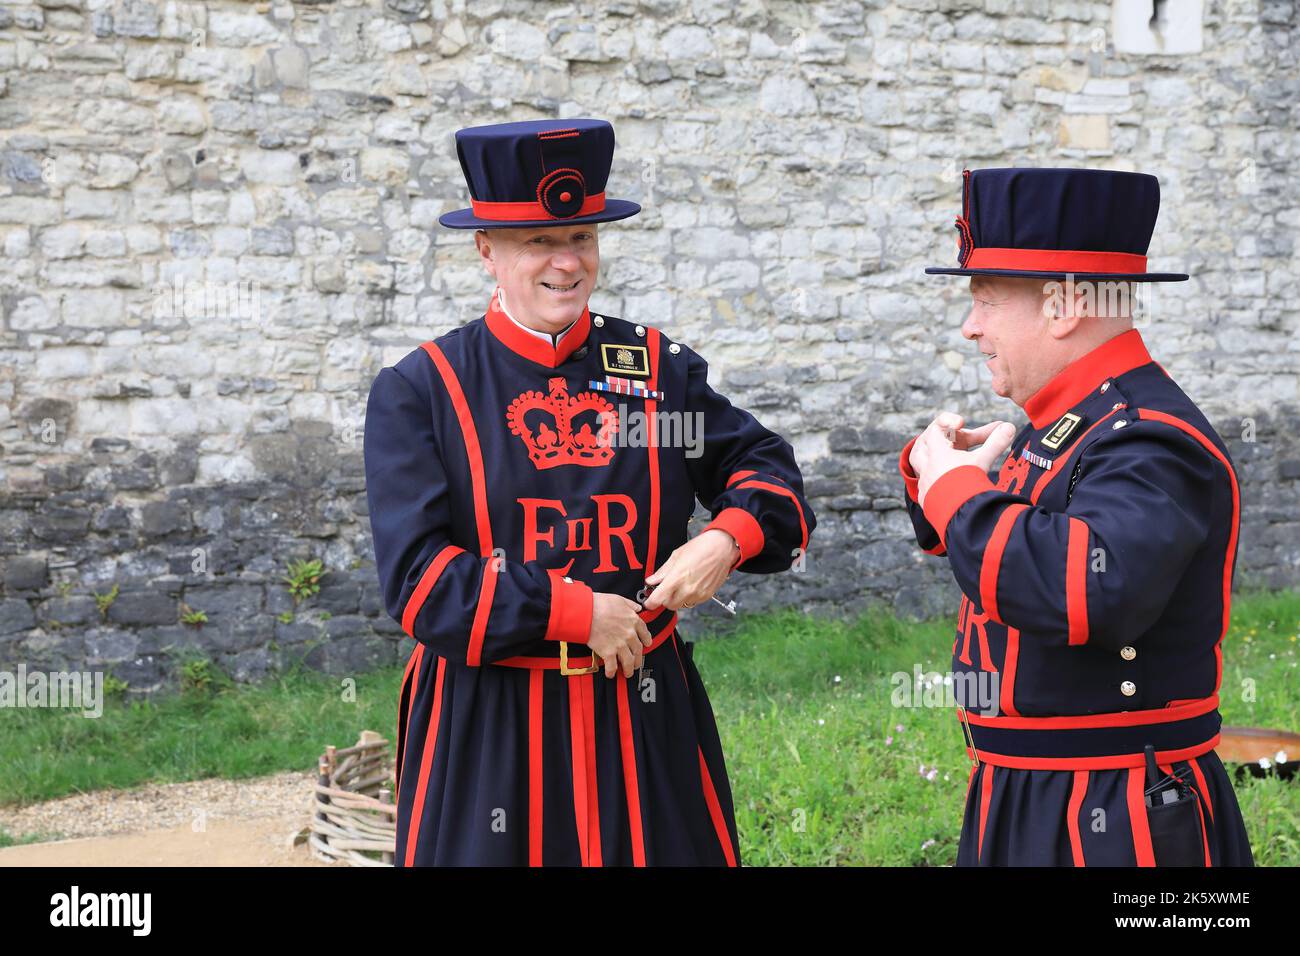 Yeomen of the Guard, or 'Beefeaters' at the Tower of London, who take guided tours around and share fascinating stories of the 1000 years of history. Stock Photo